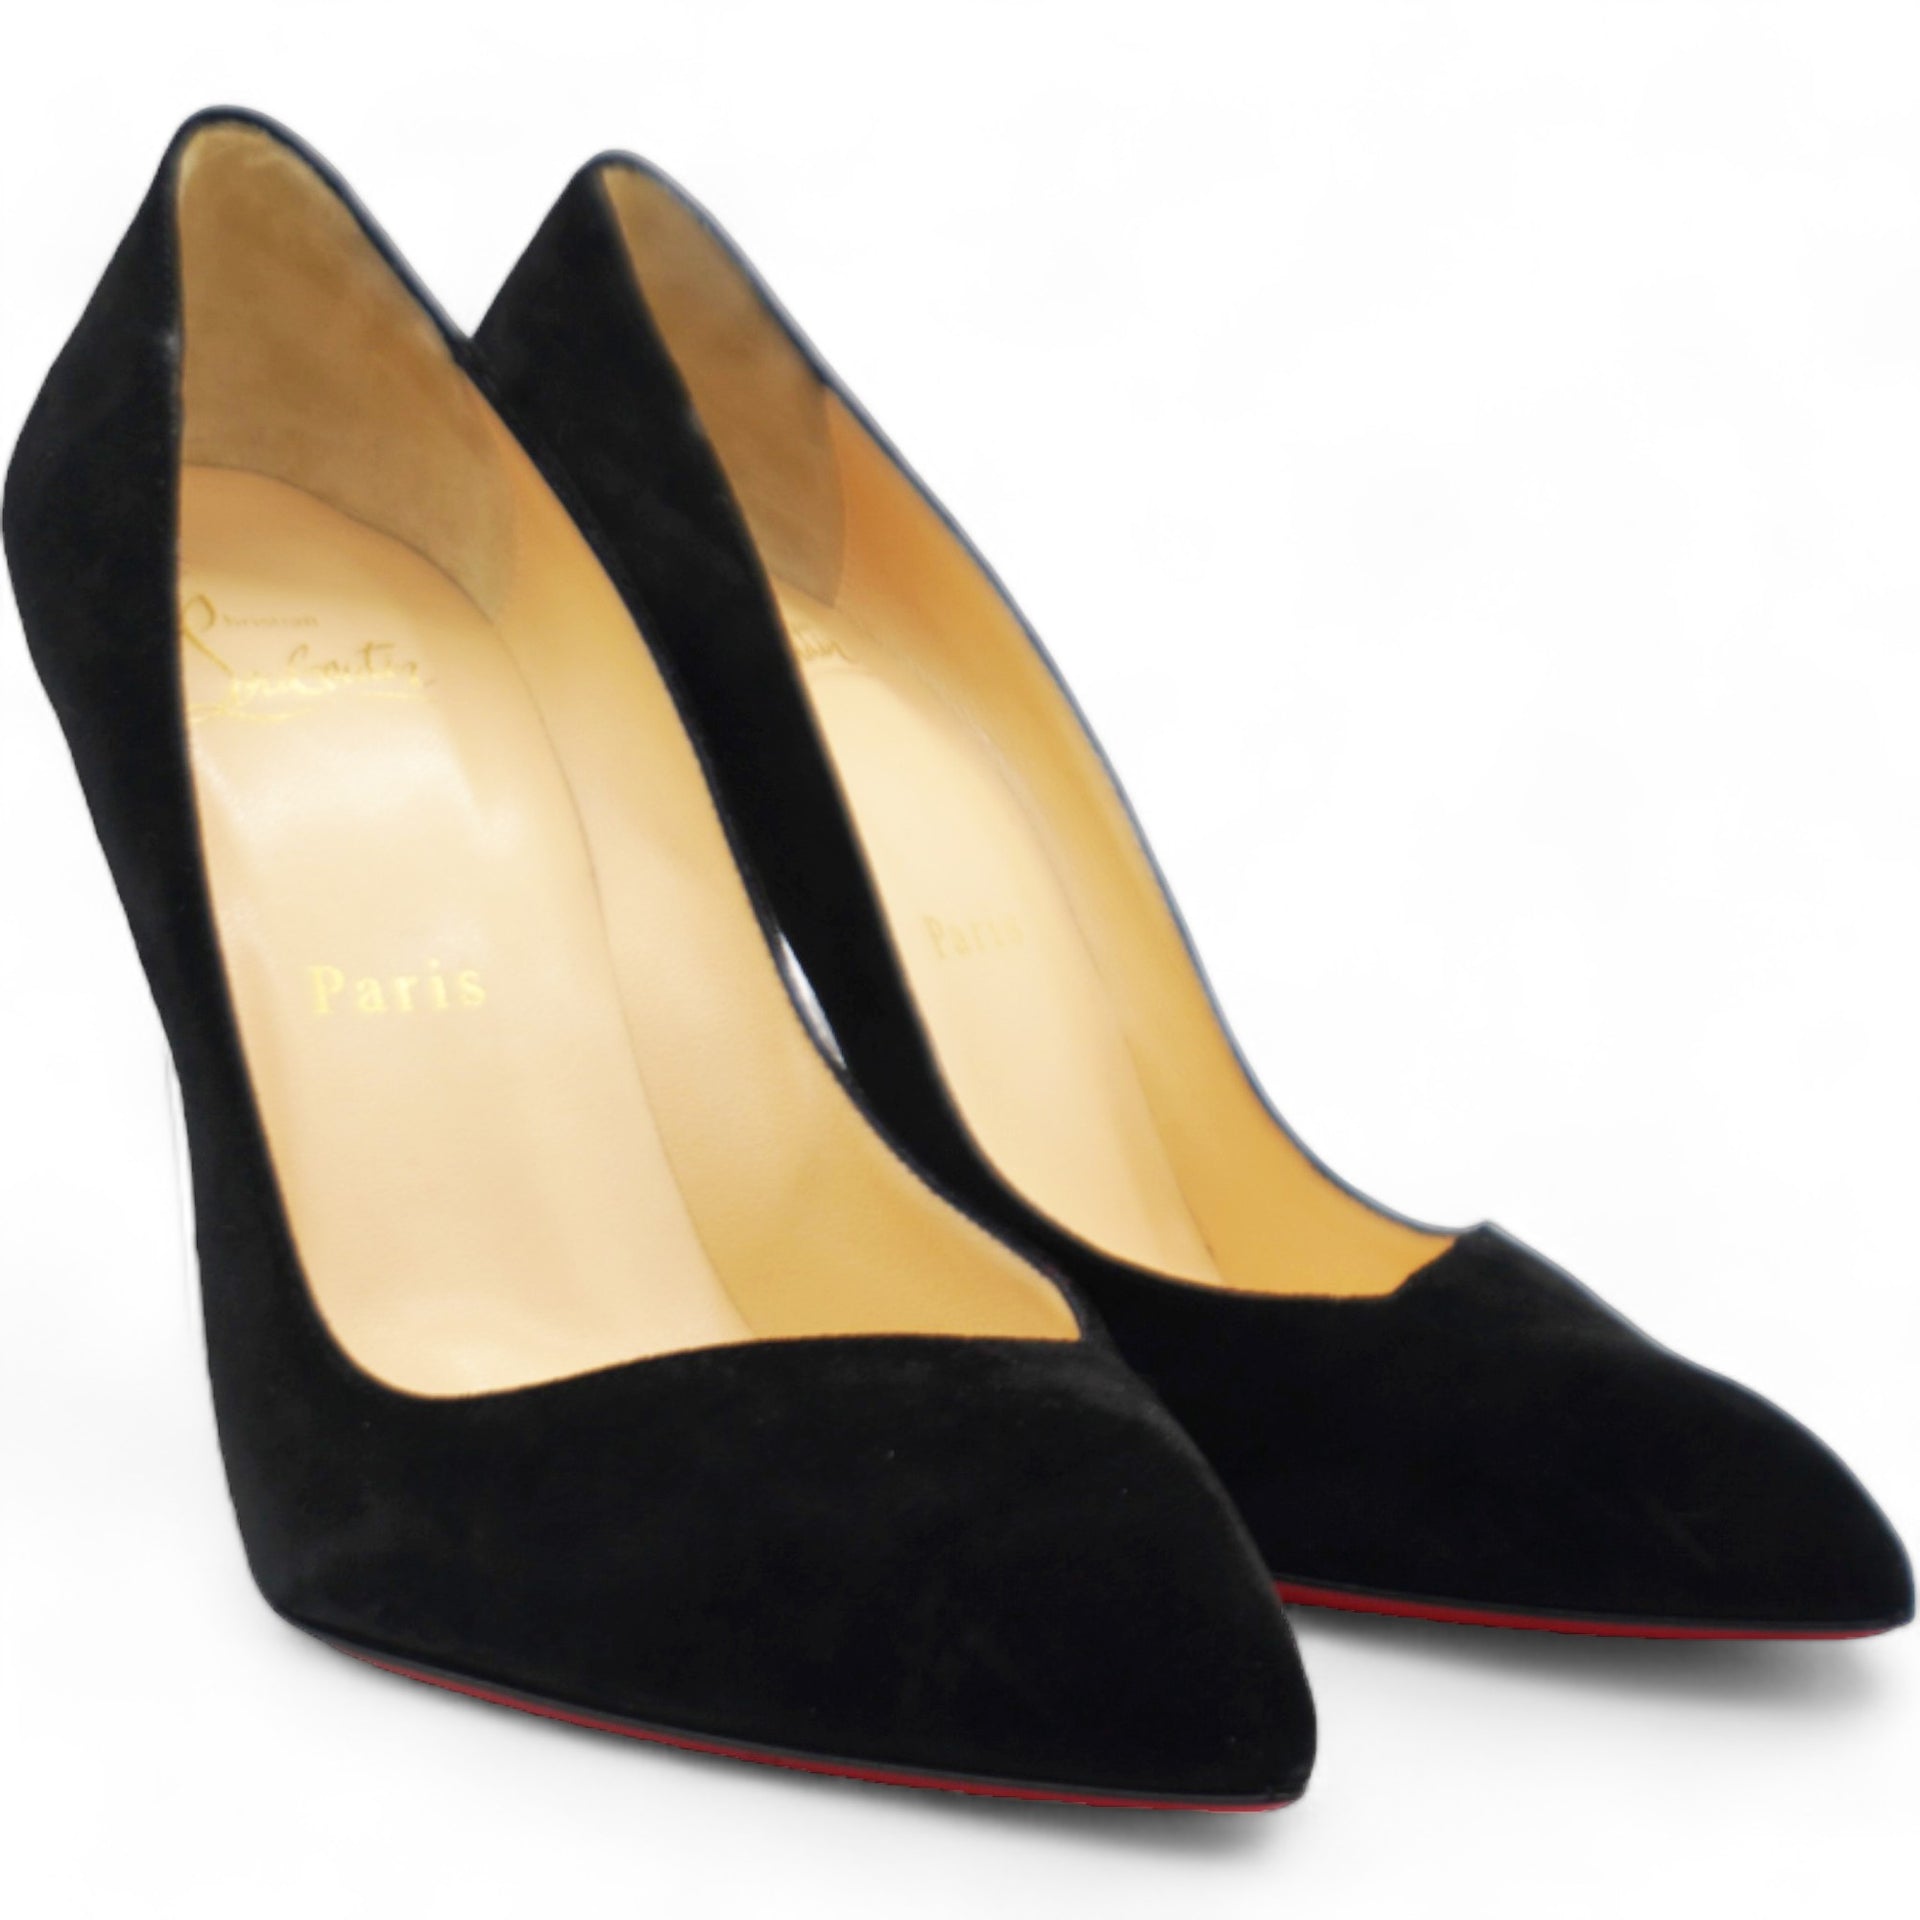 Black Suede Pointed Toe Pumps Size 37.5